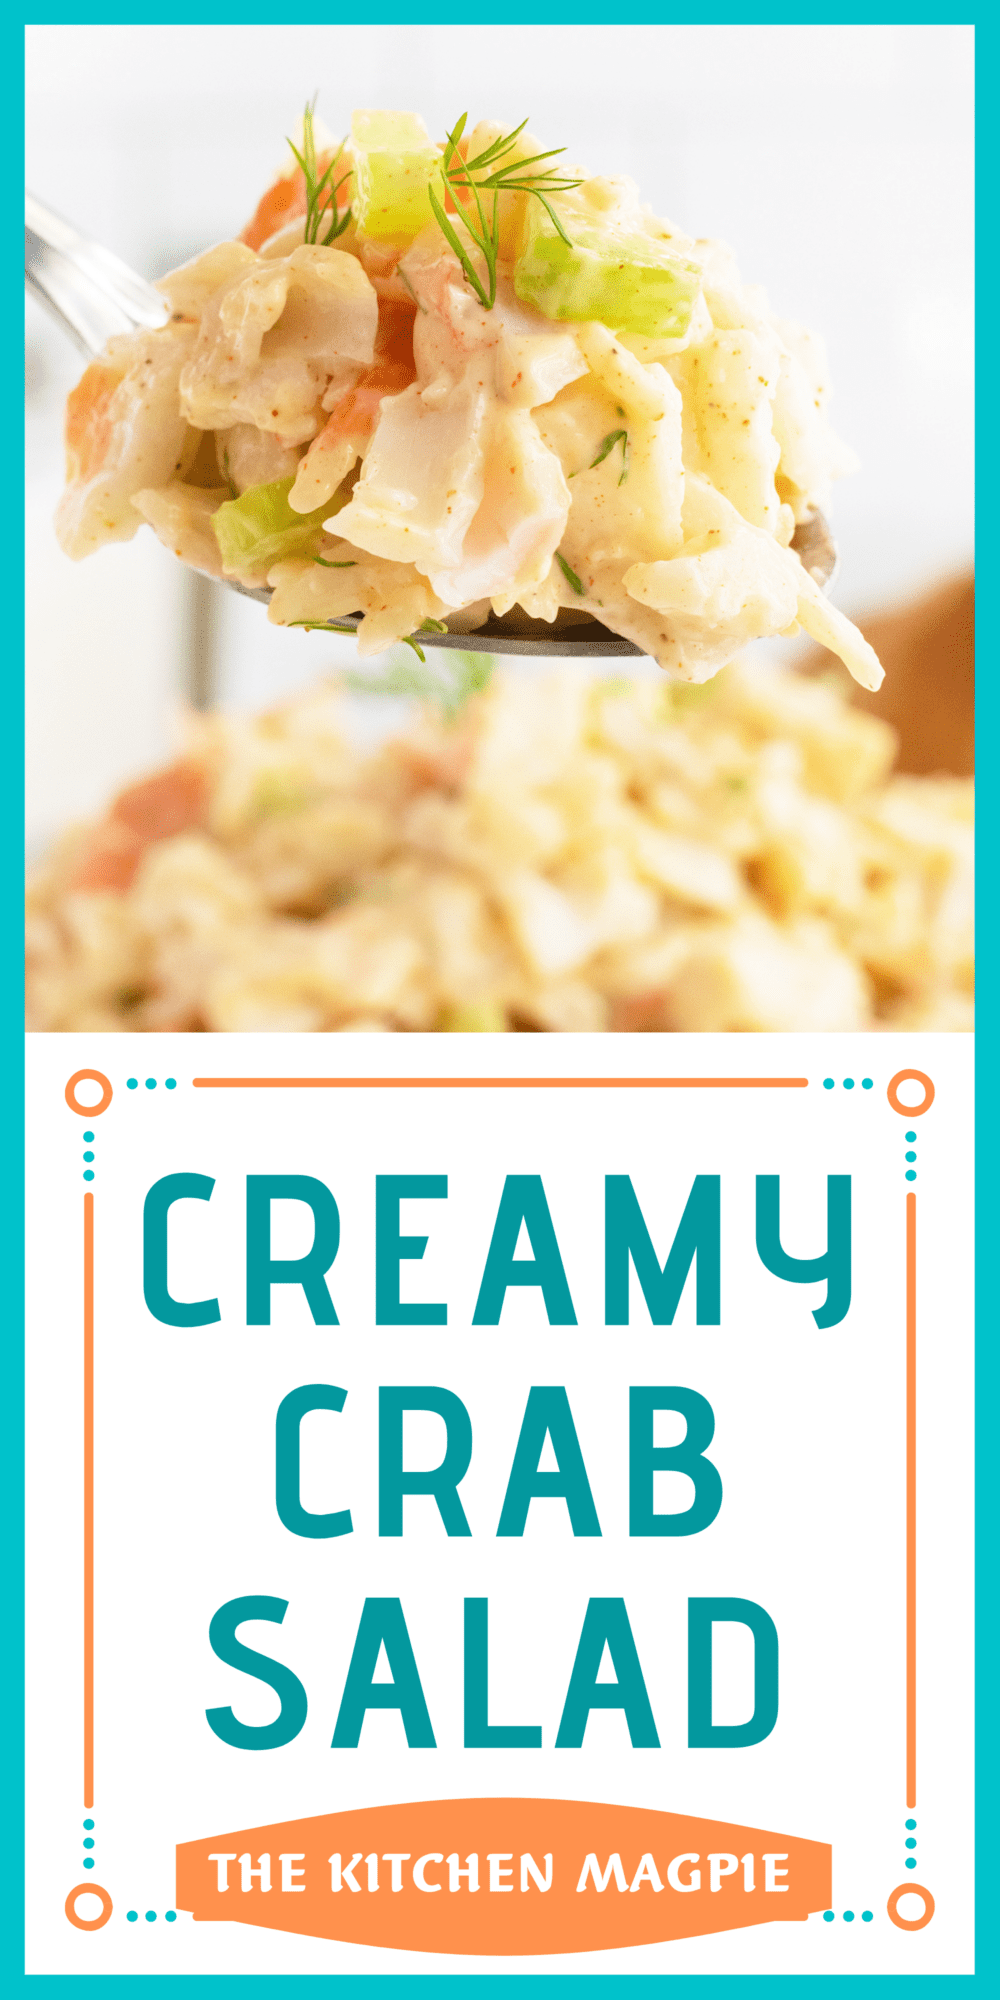 This versatile Crab Salad is creamy smooth, with a slight crab flavor, perfect for that light lunch!